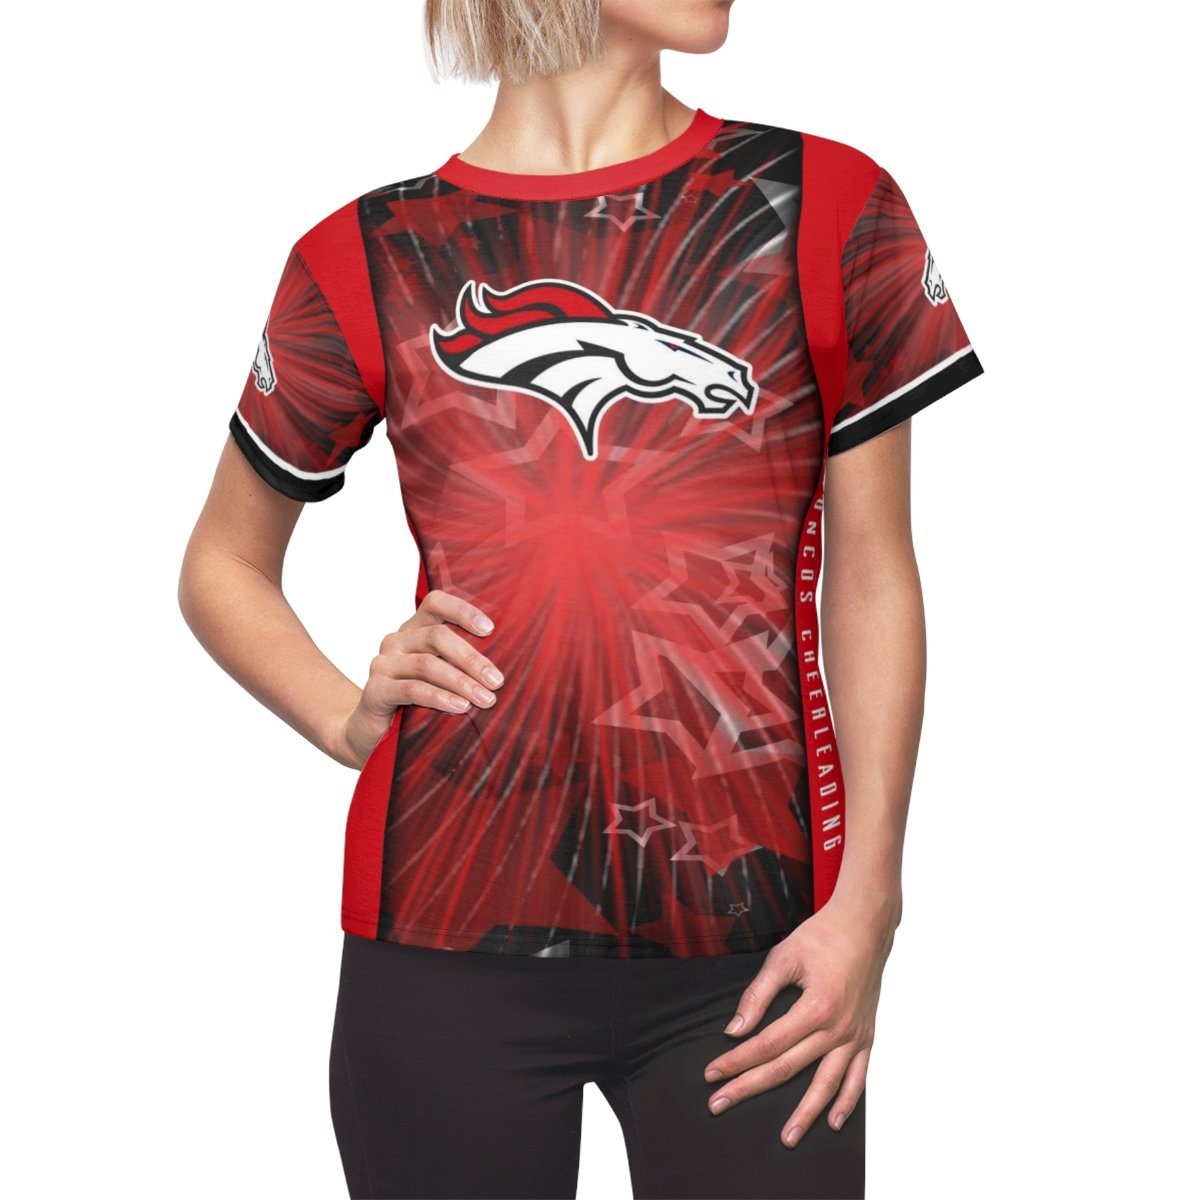 Spirit - V.1 - Extreme Sportswear Women's Cut & Sew Template-Photoshop Template - Photo Solutions